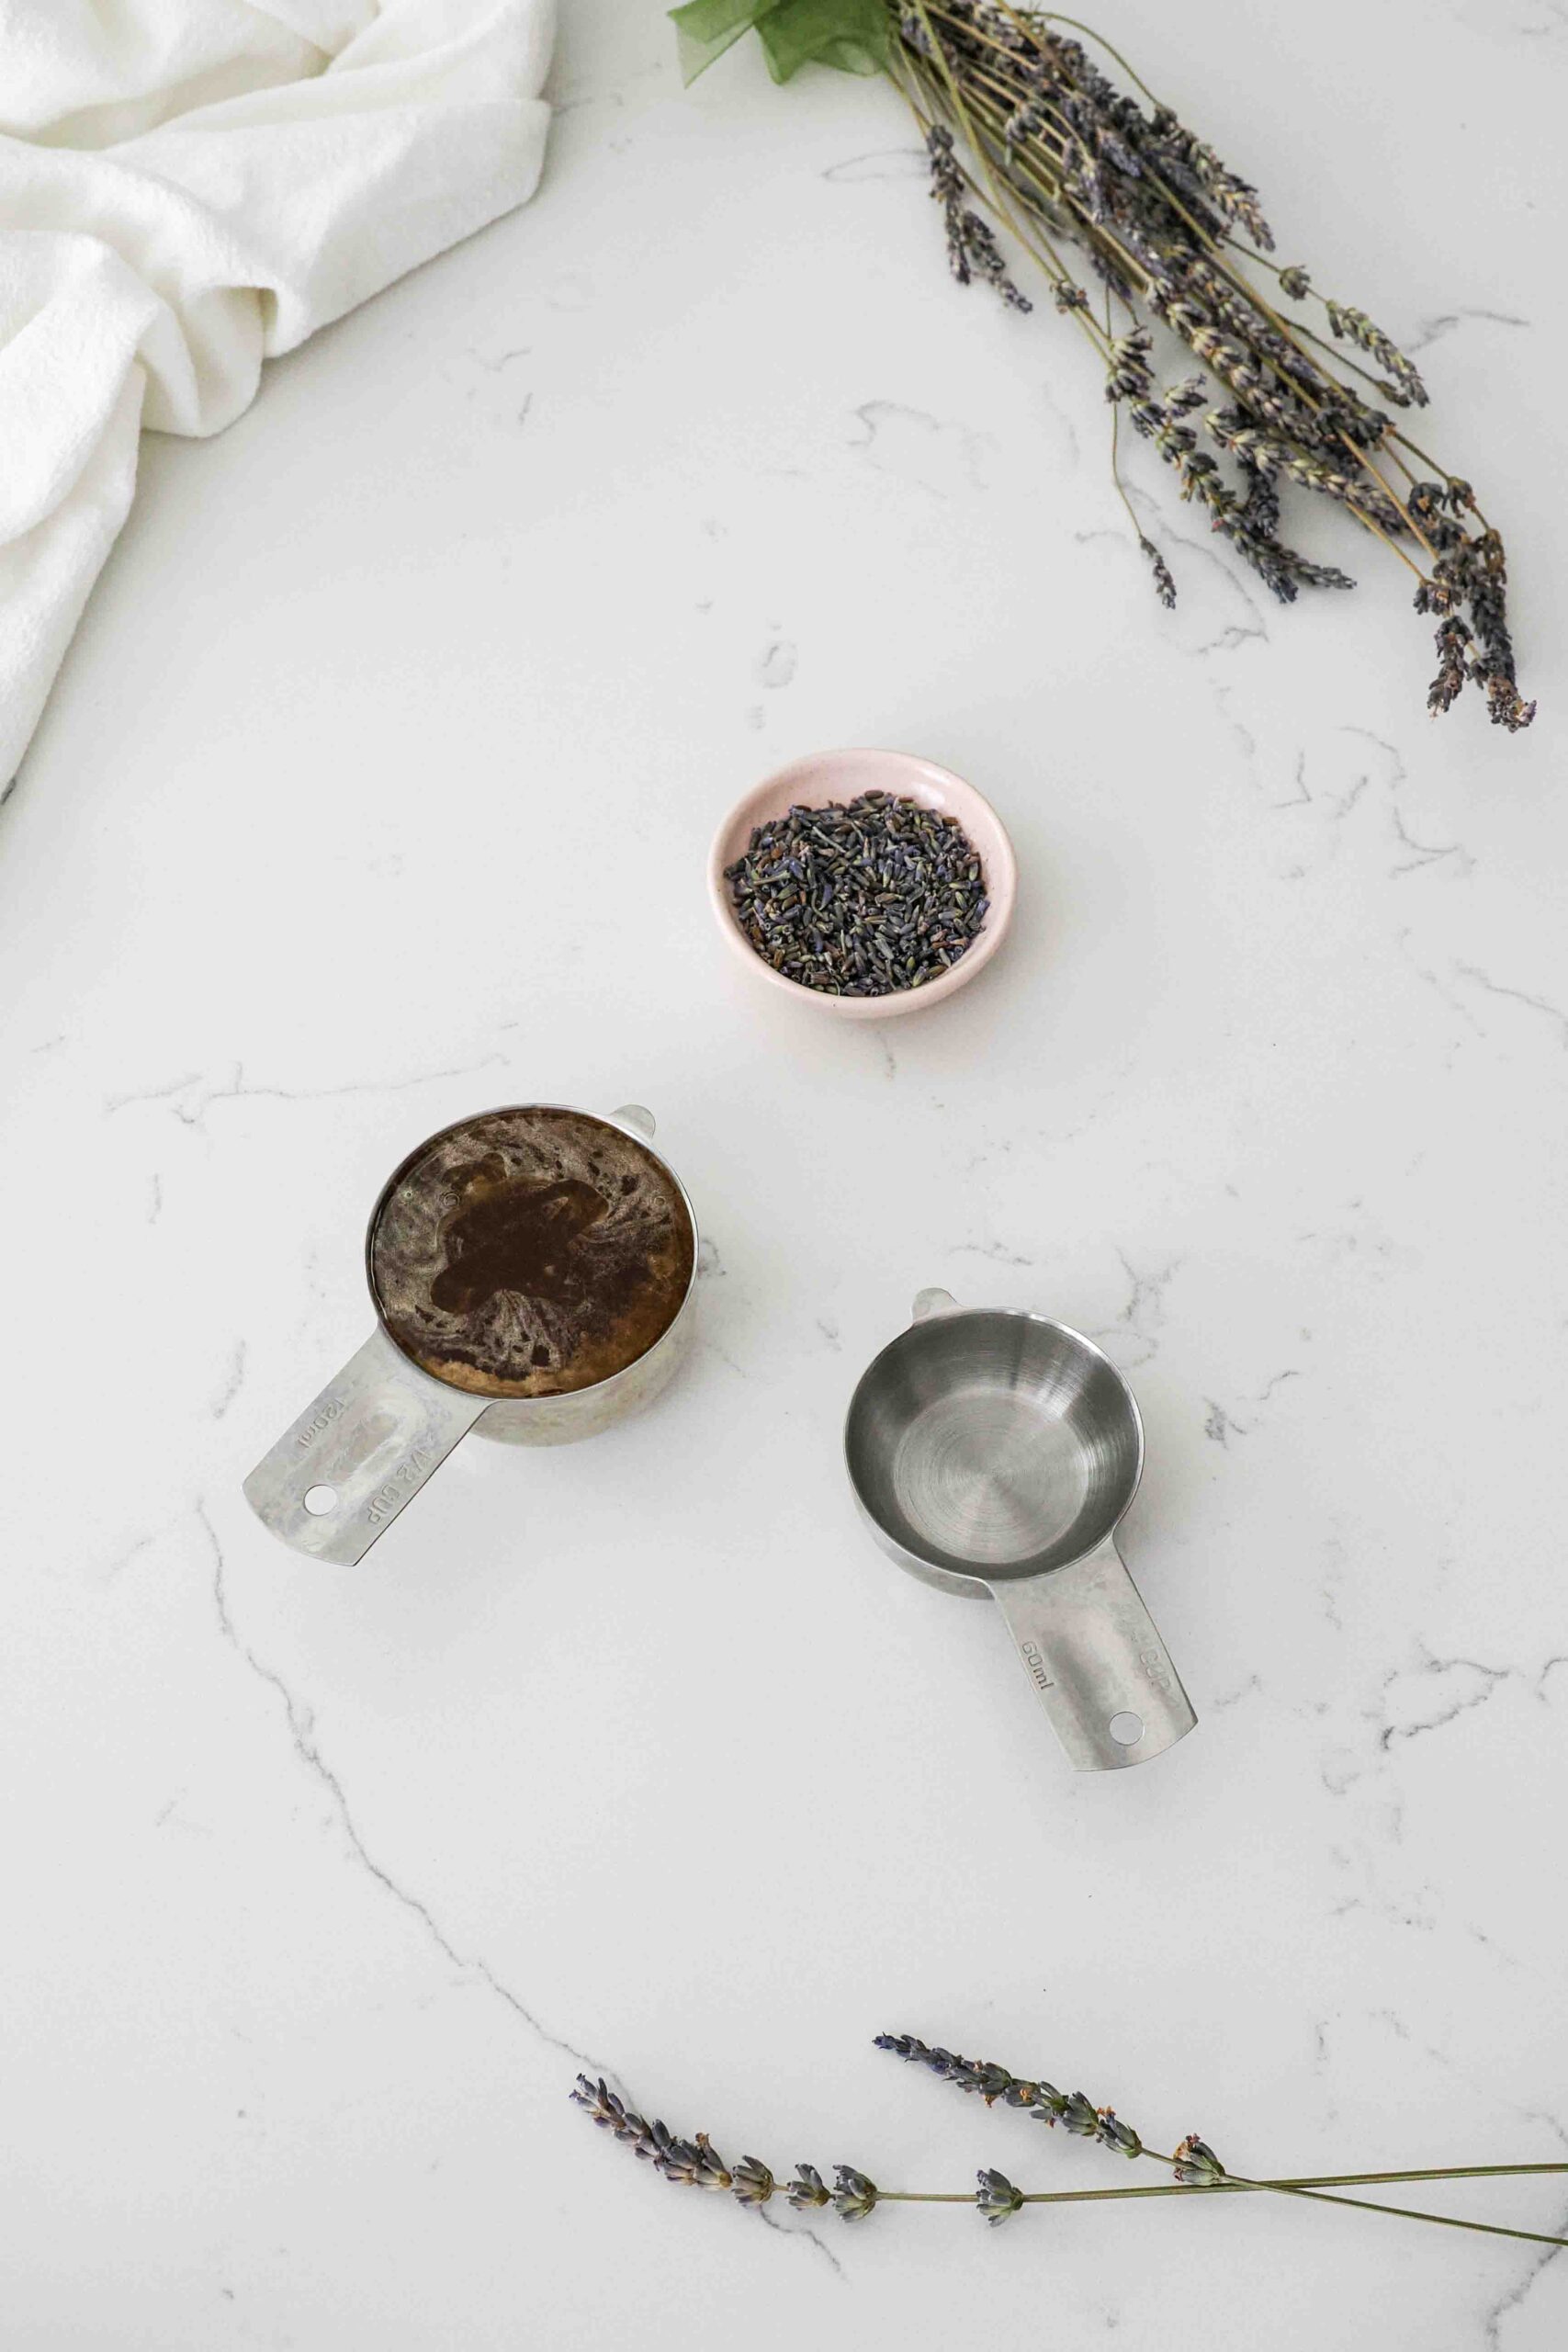 Honey, lavender, and water in measuring cups on a white countertop.